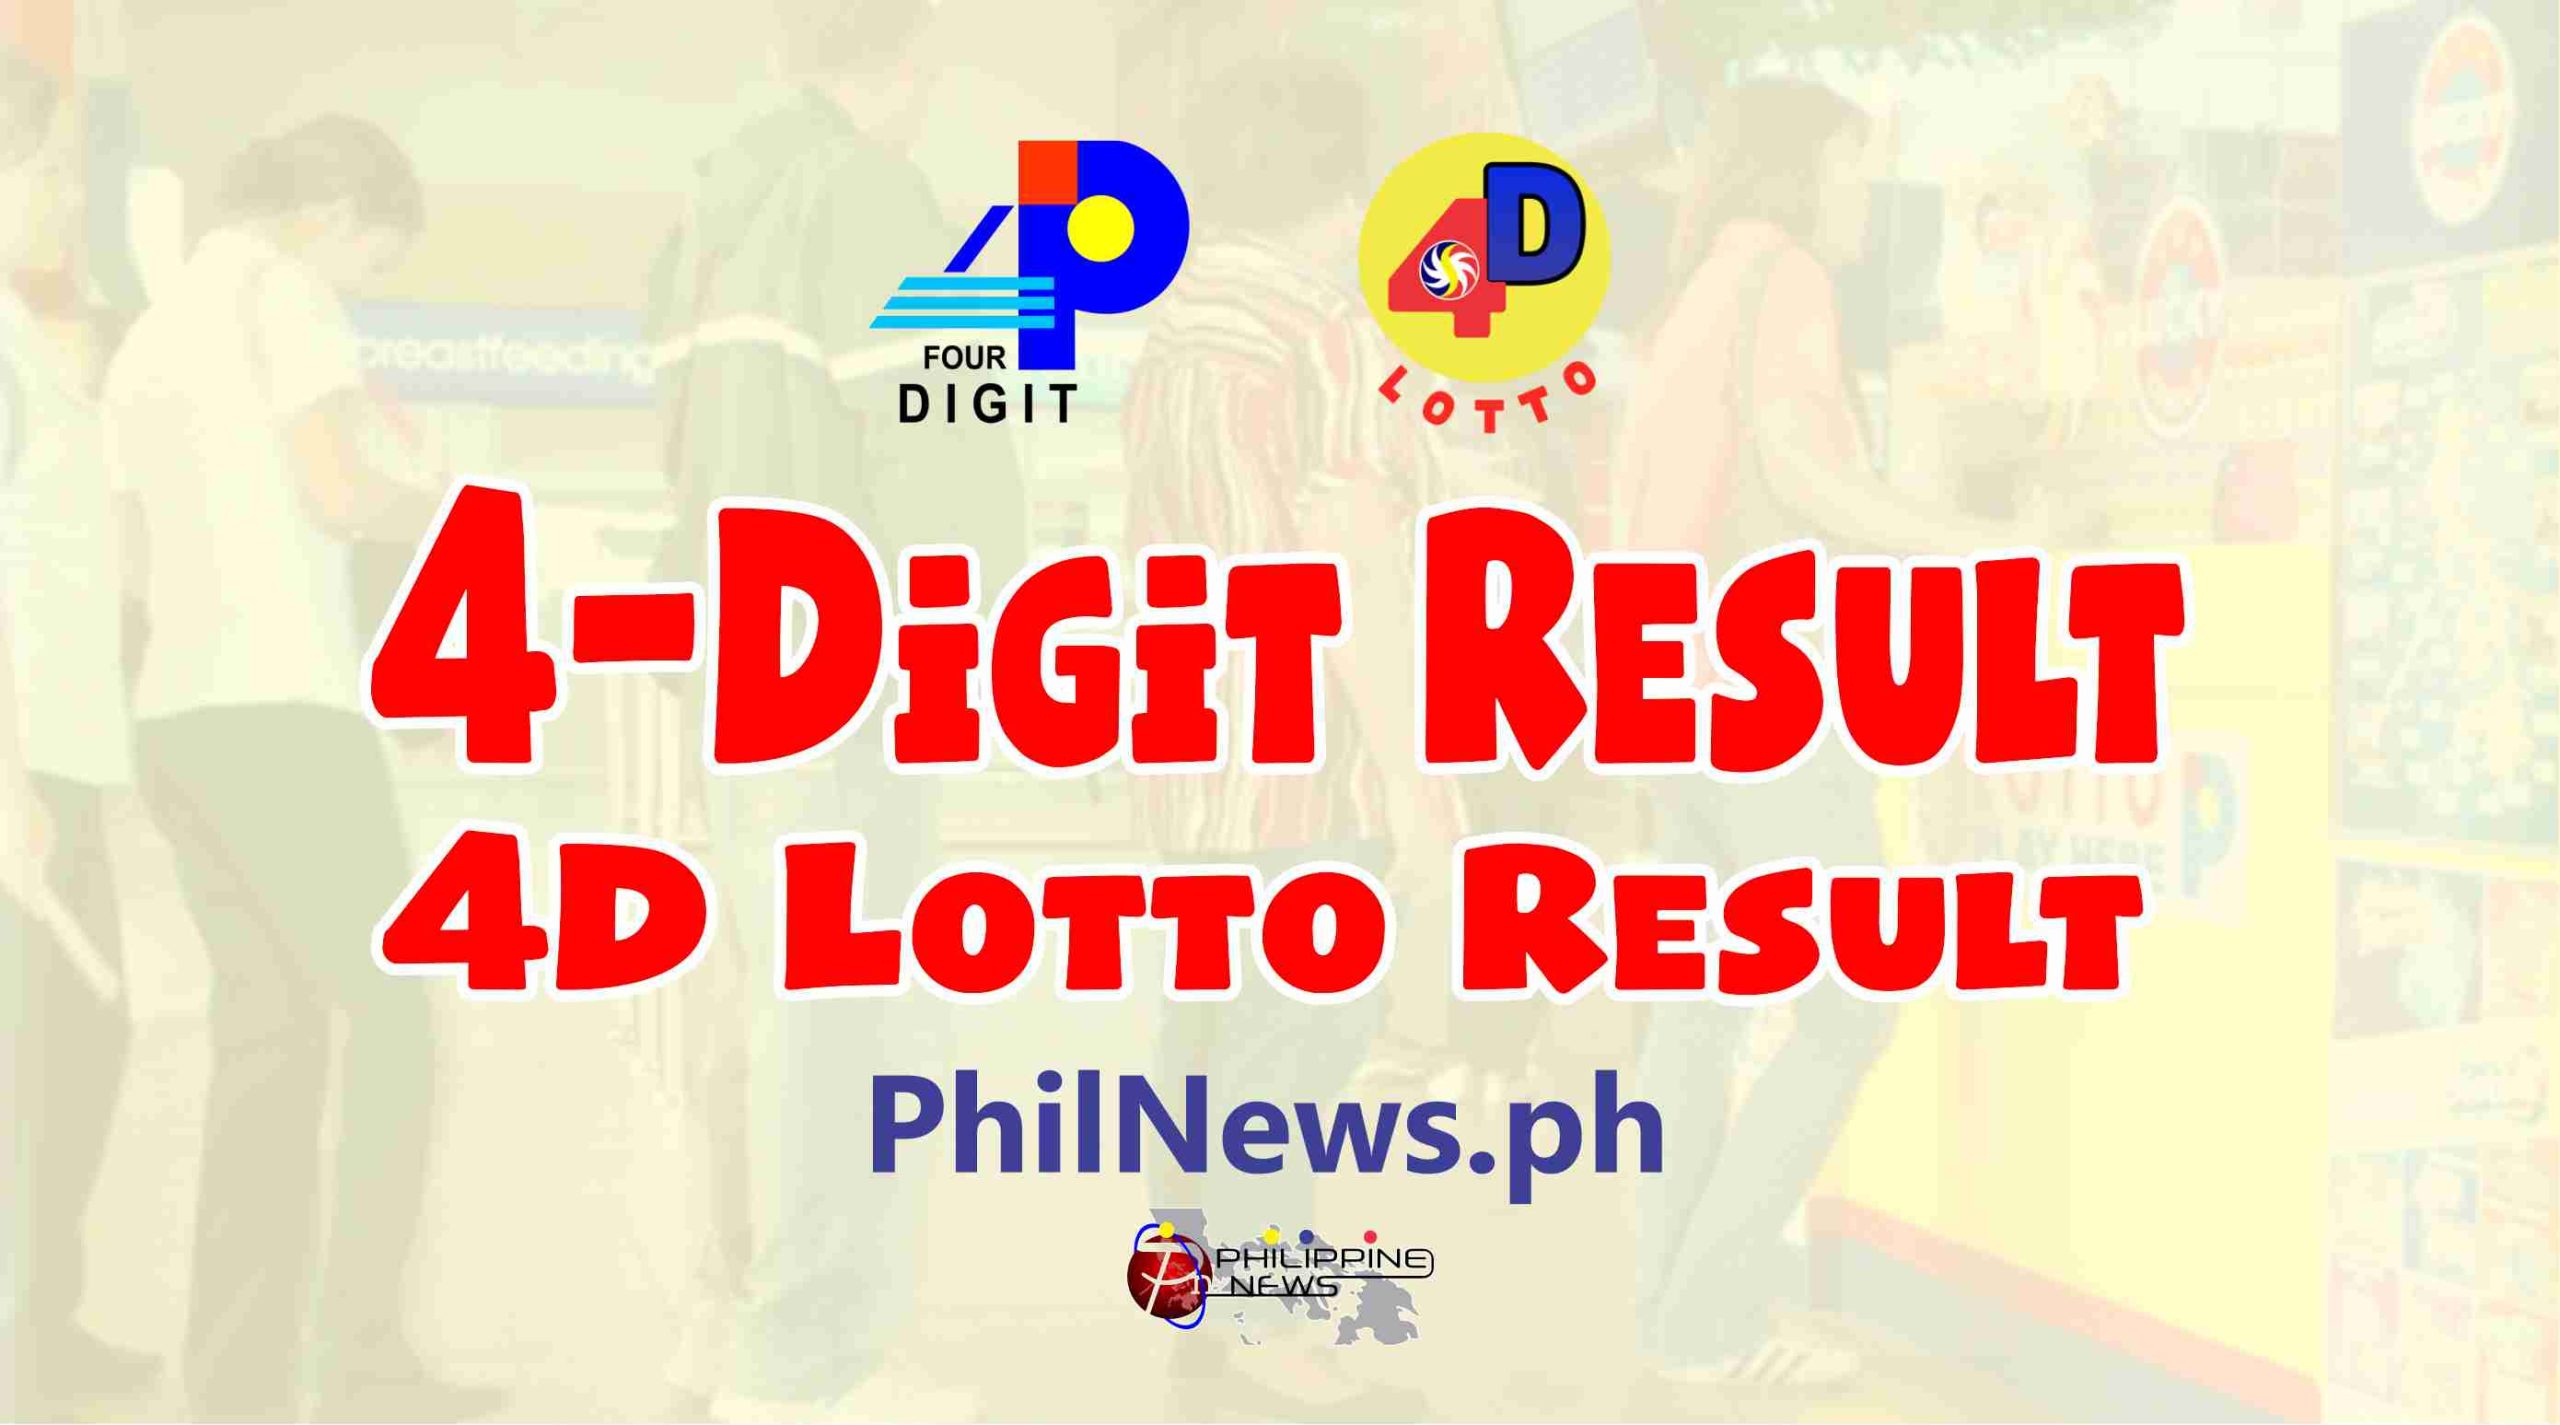 Grand lotto result today 4d